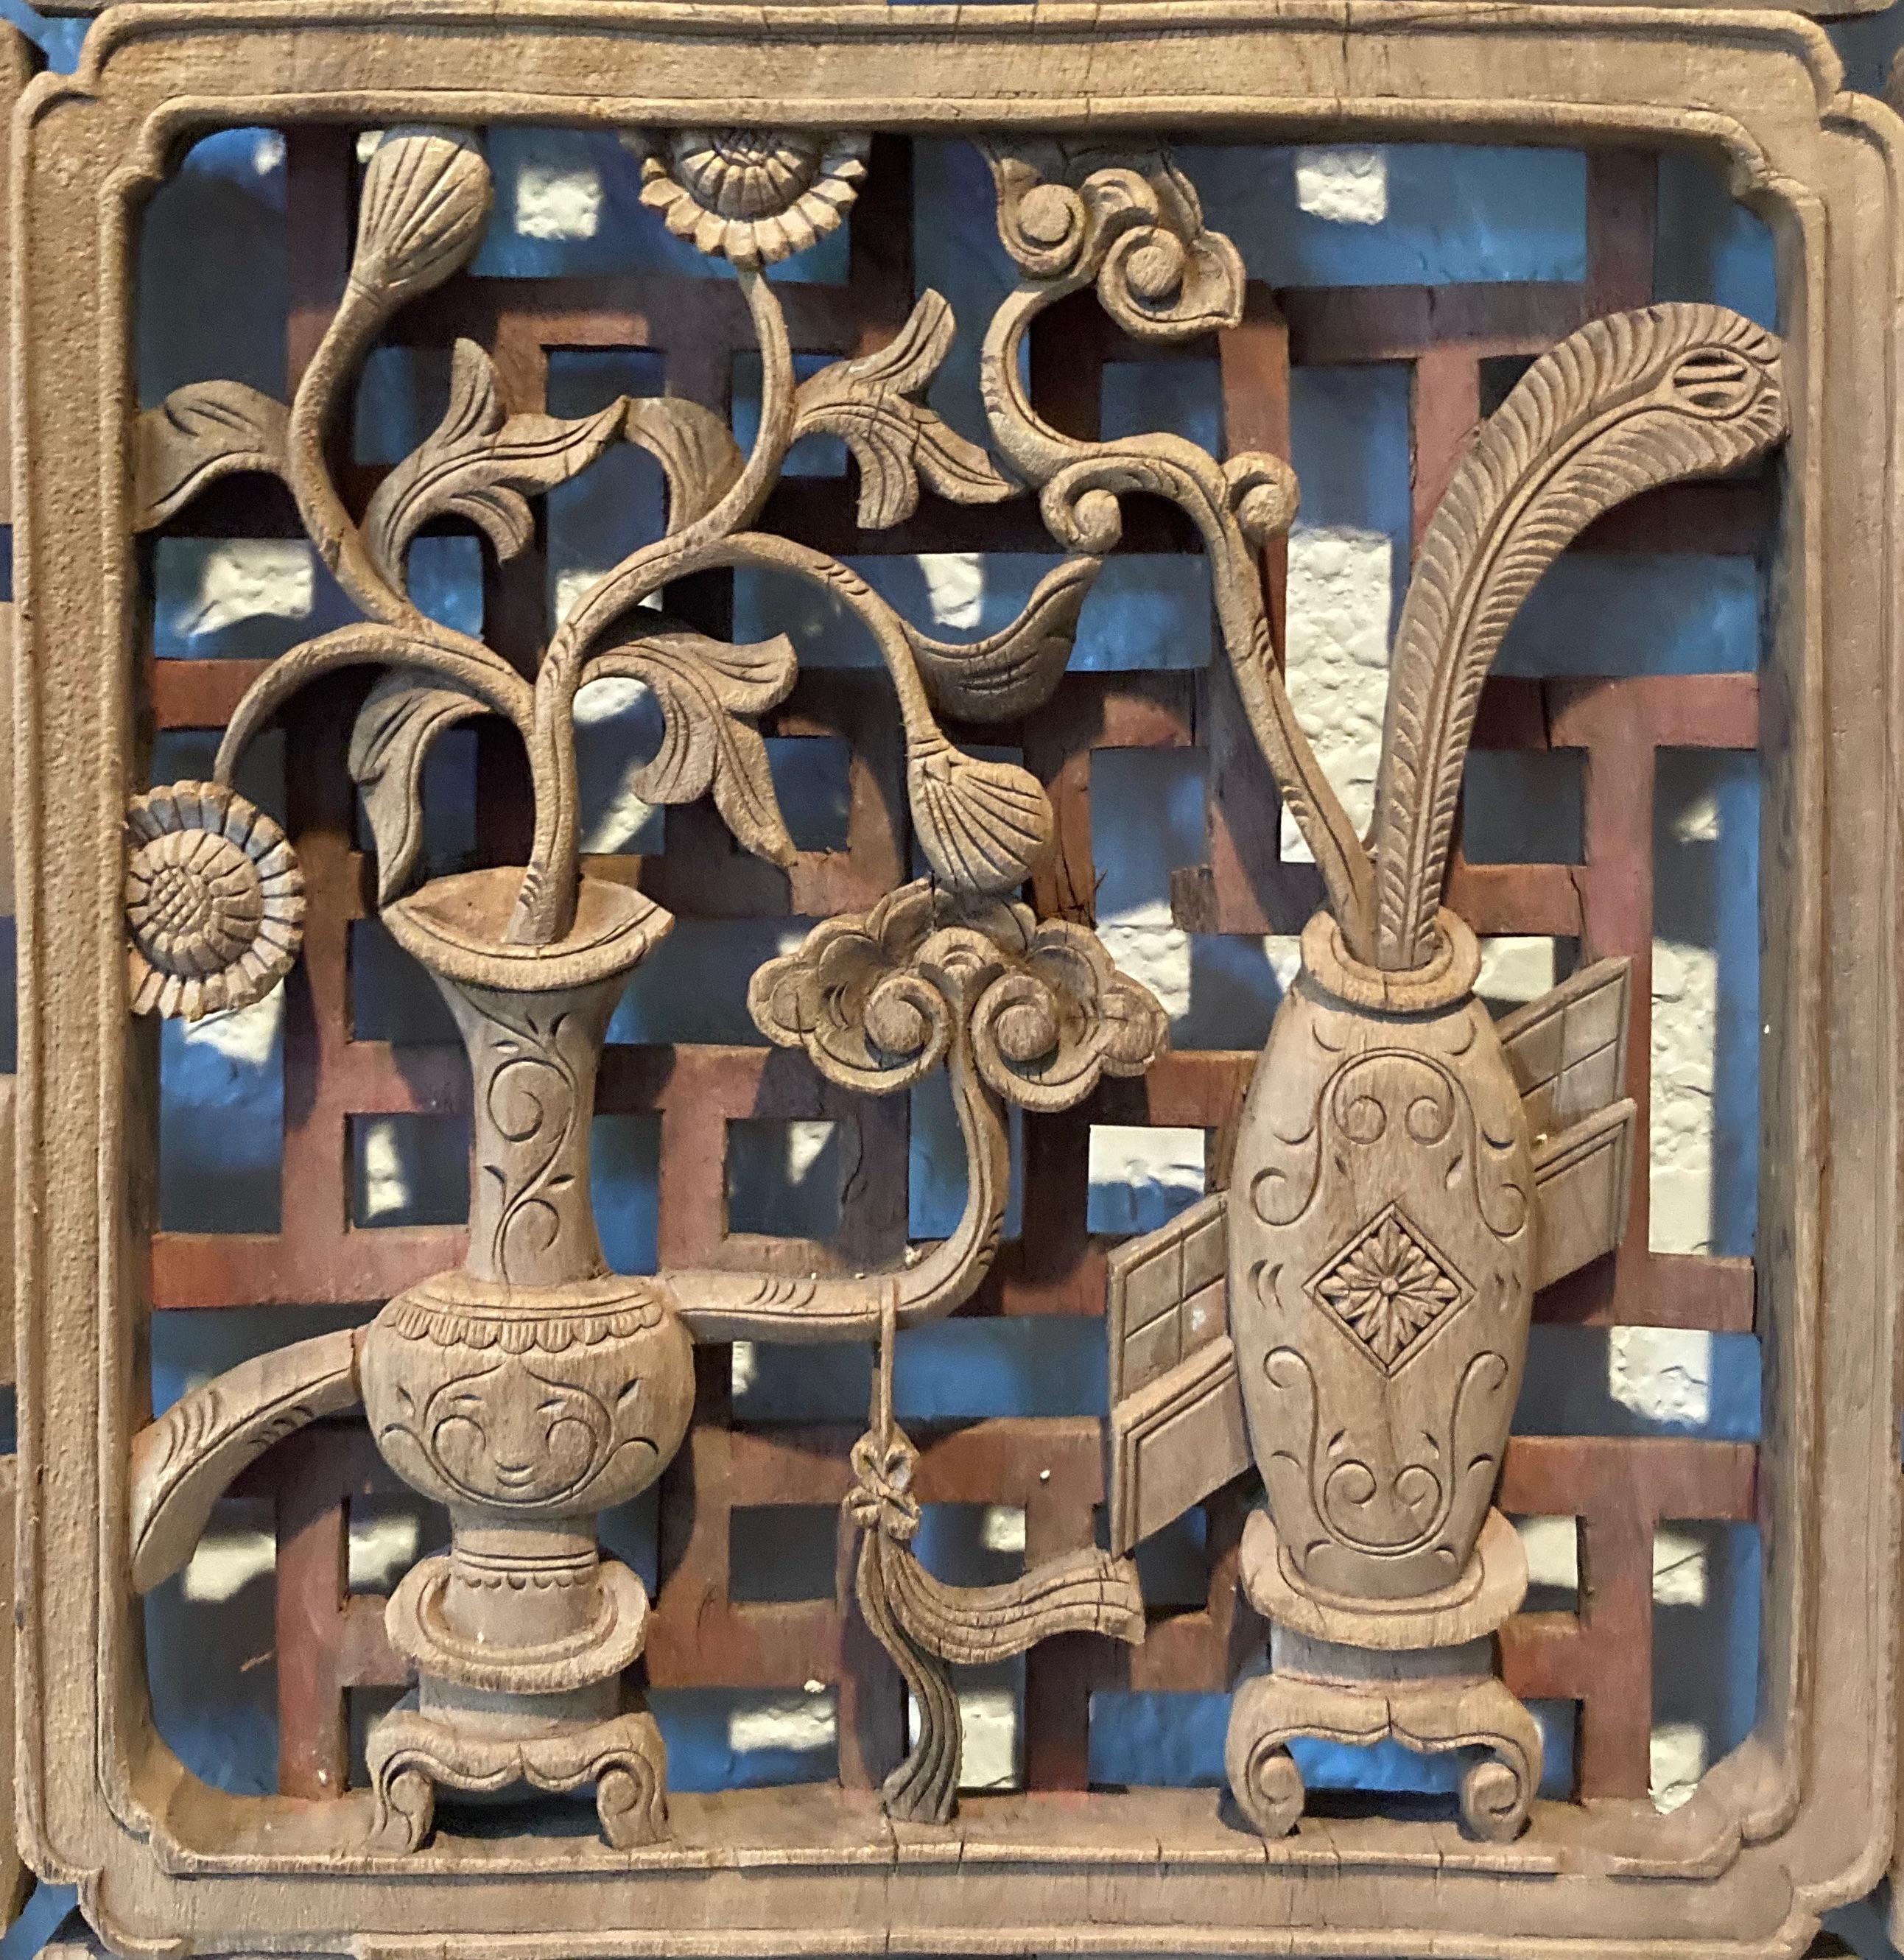 Unframed panel with openwork carving. Carved from one piece of solid wood. Square center carving with vase/floral, and surrounding floral and dragon motifs.